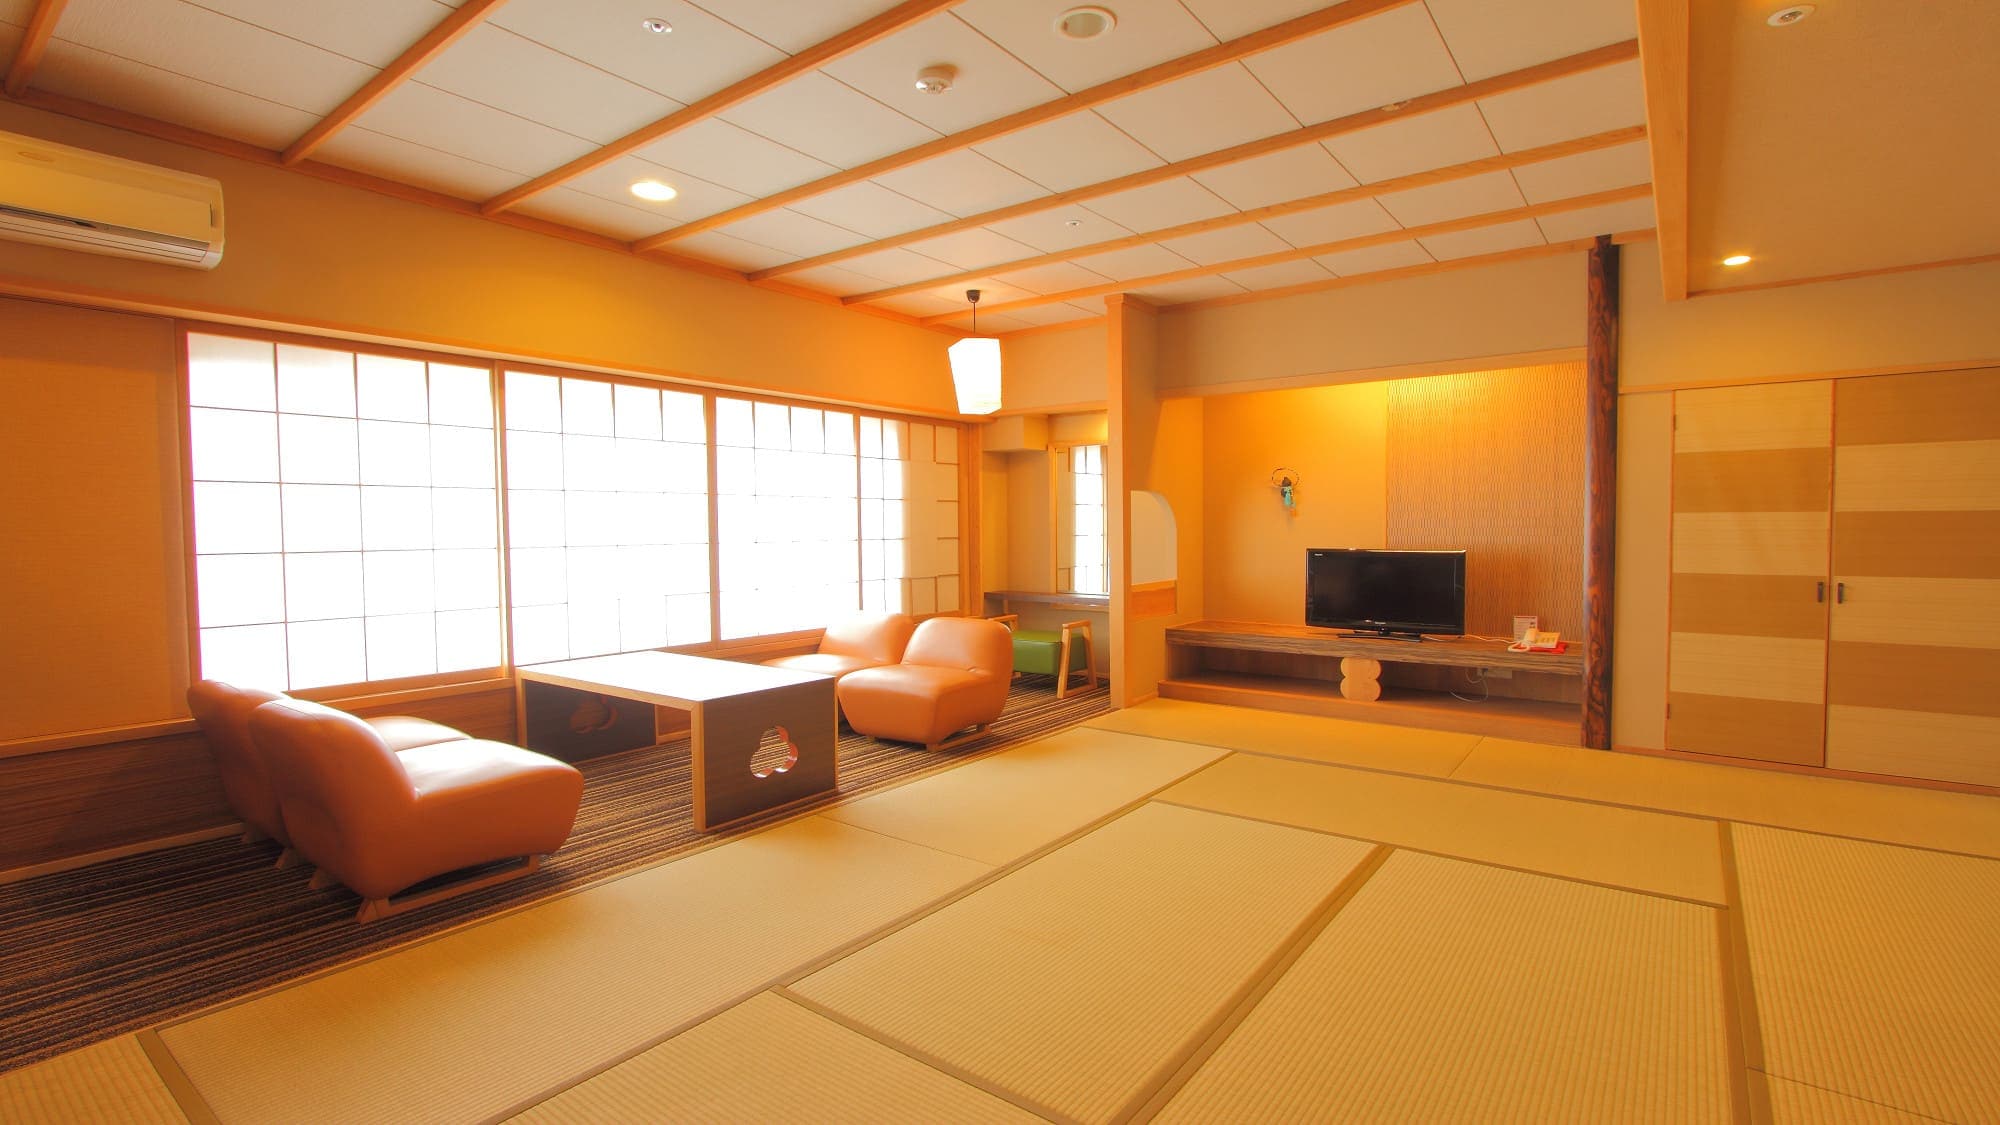 11.5 tatami Japanese-style room (example) * There are different types